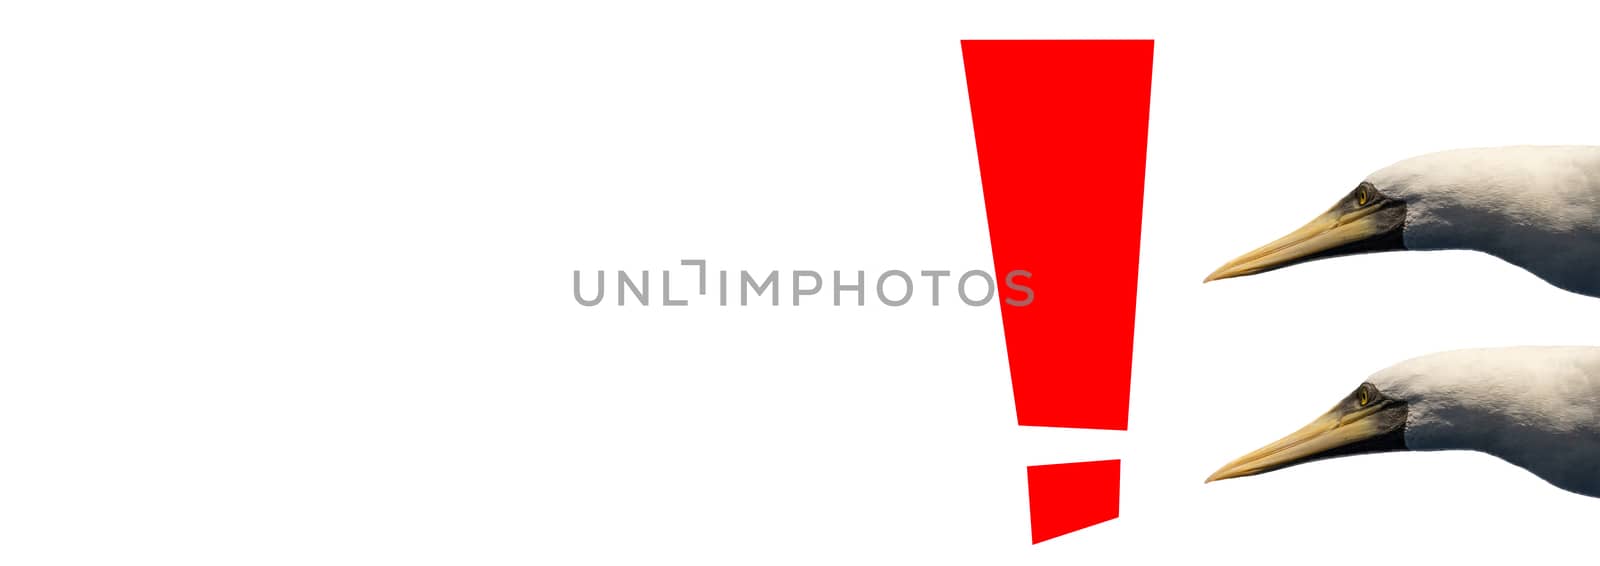 Exclamation mark in red color on white background with two birds looking at it. Isolated. Blank space on the left part of the image.